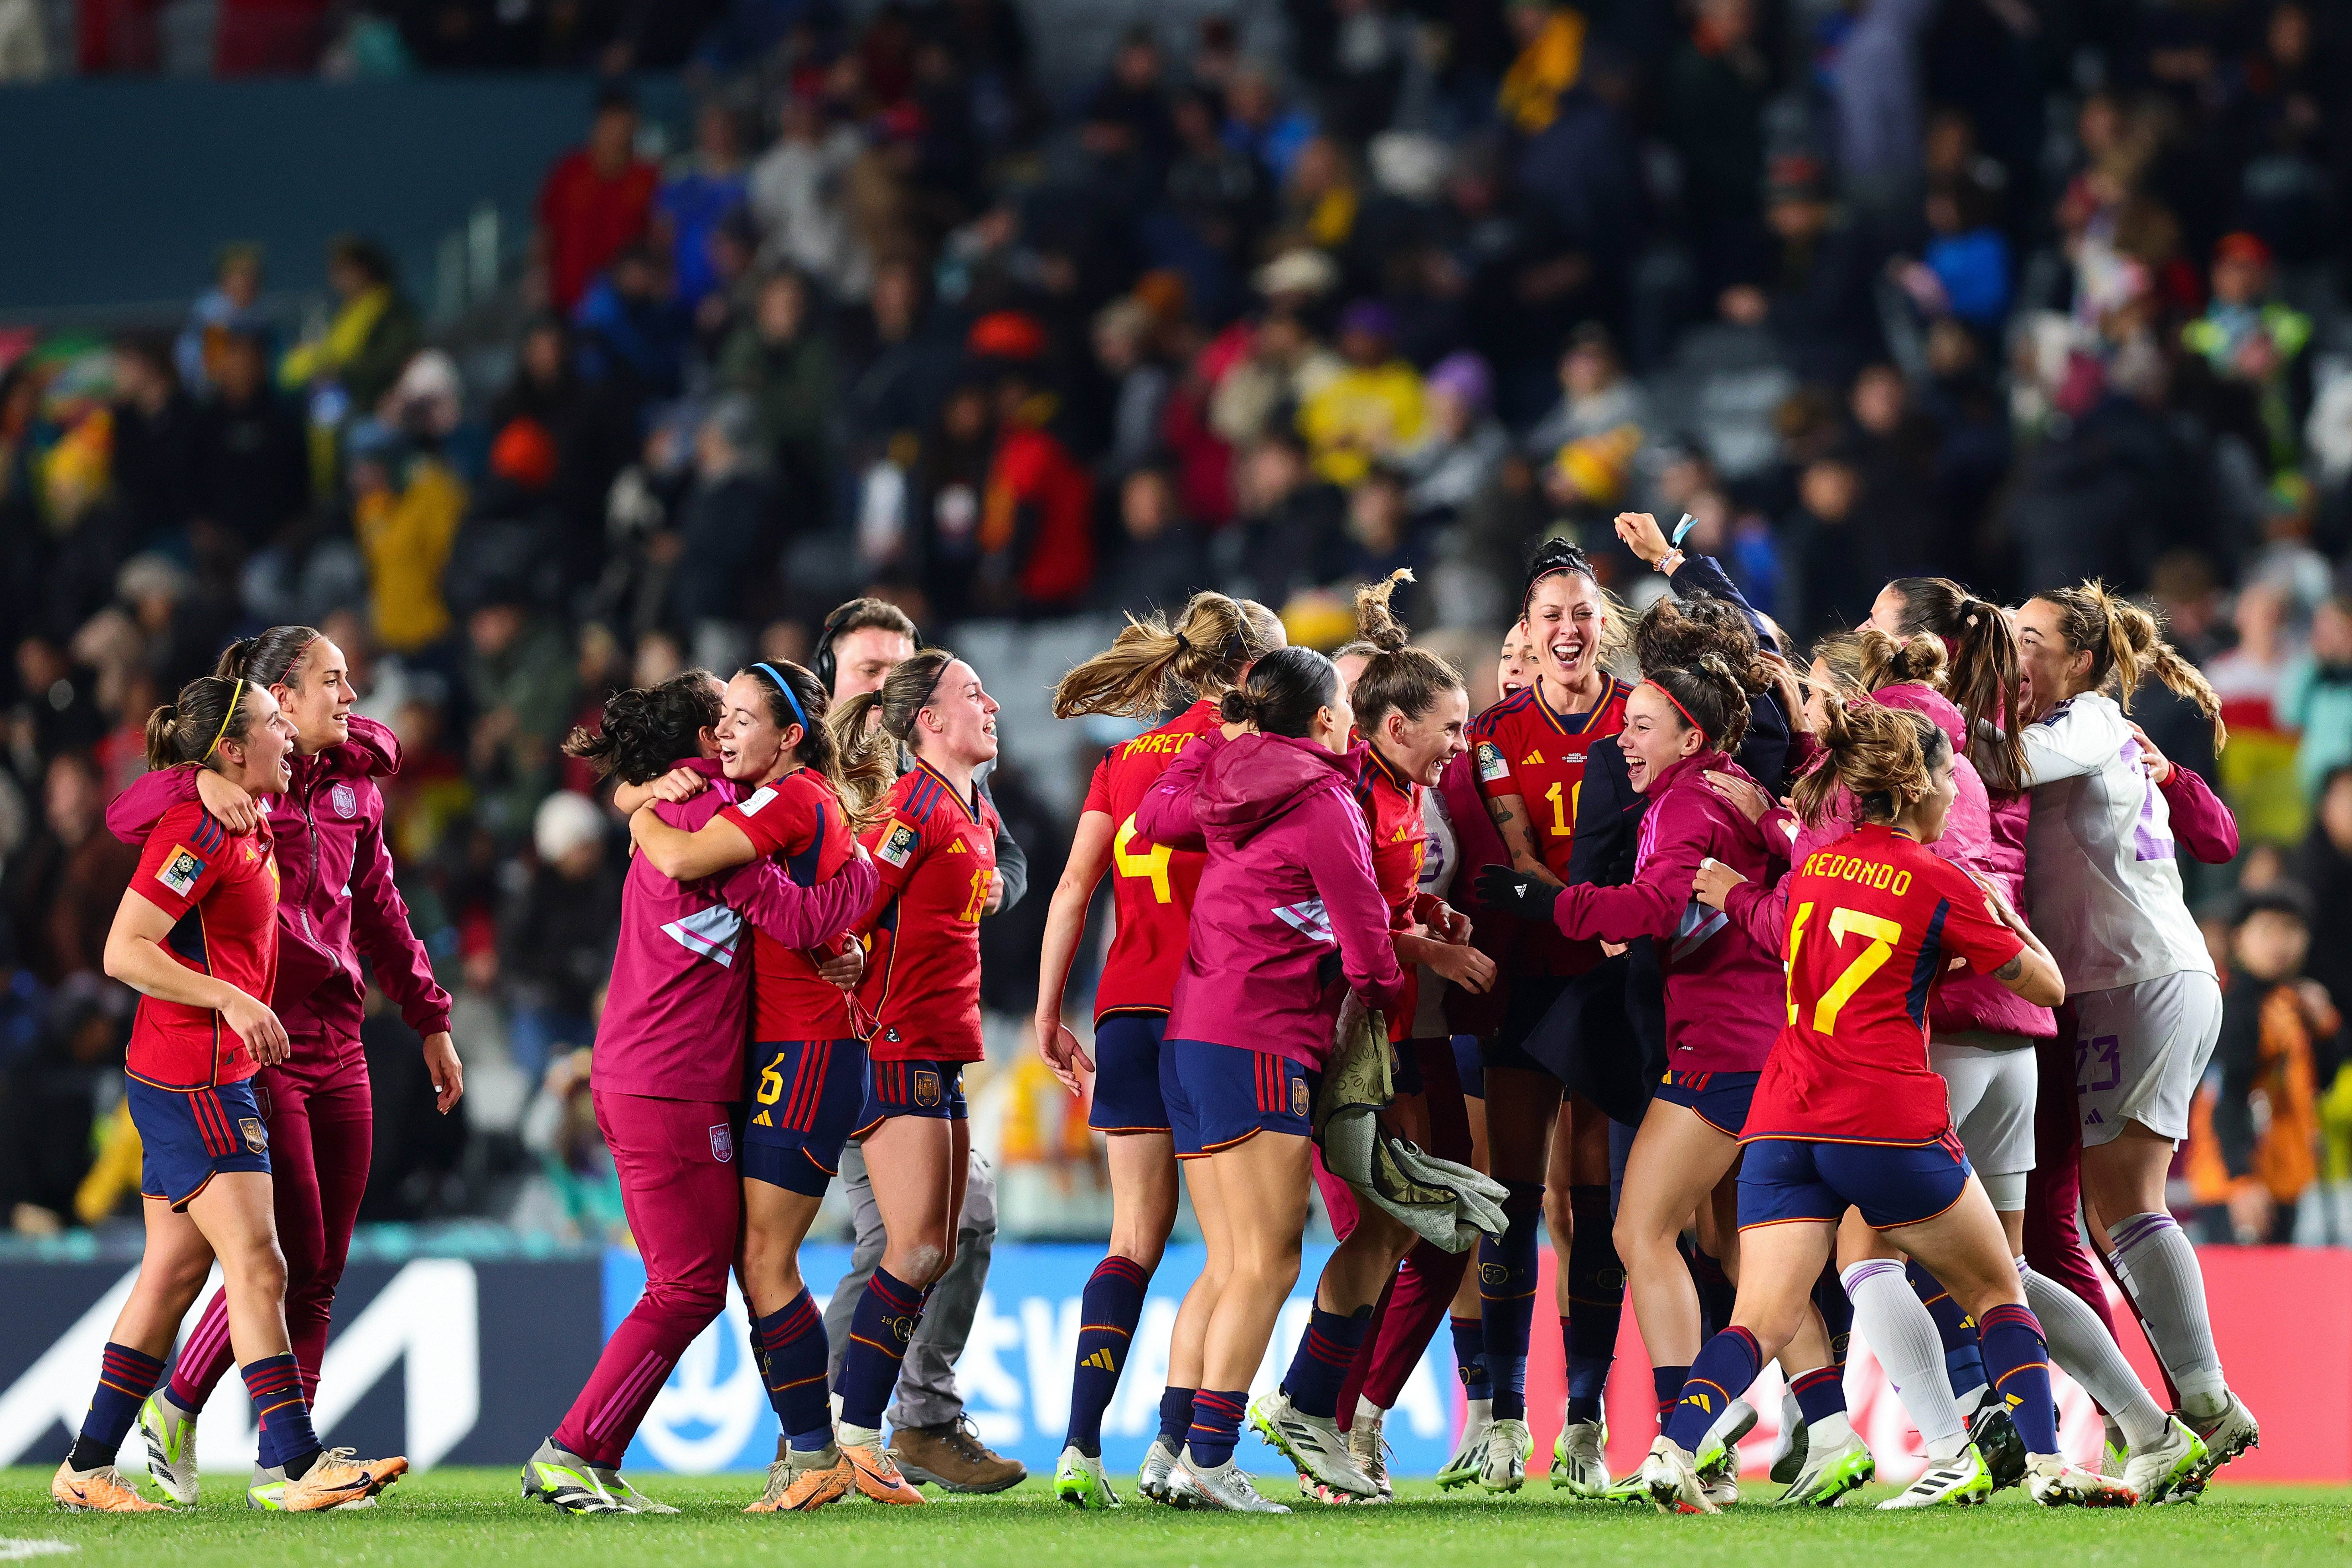 Barcelona to mount giant screen for Spain-England Women's World Cup final in Vall d'Hebron